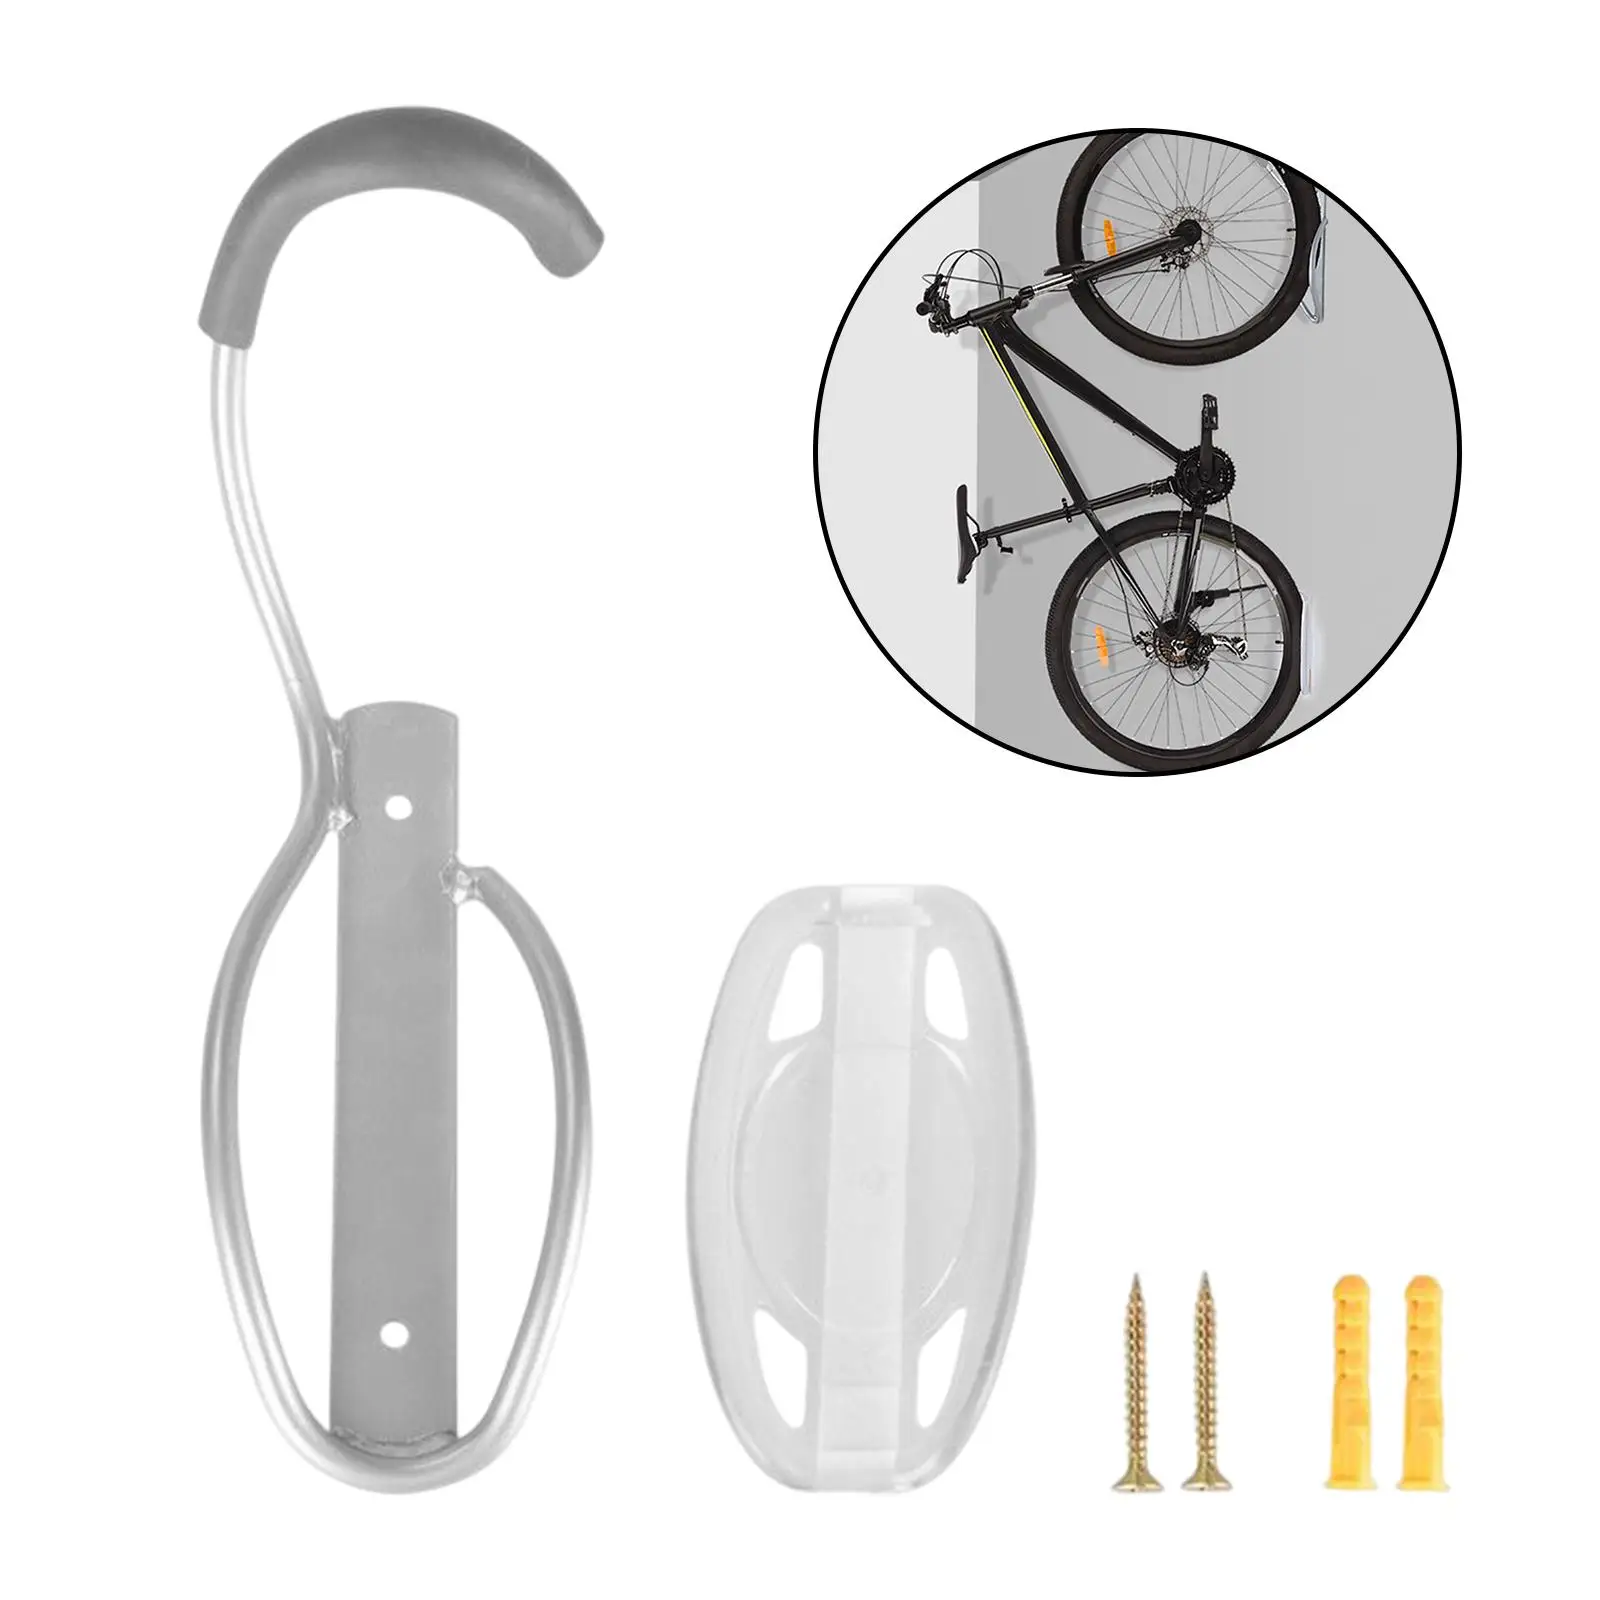 

with Screws Bike Storage Rack Sturdy Easy to Intall Save Place Practical Hanging Wall Hanger